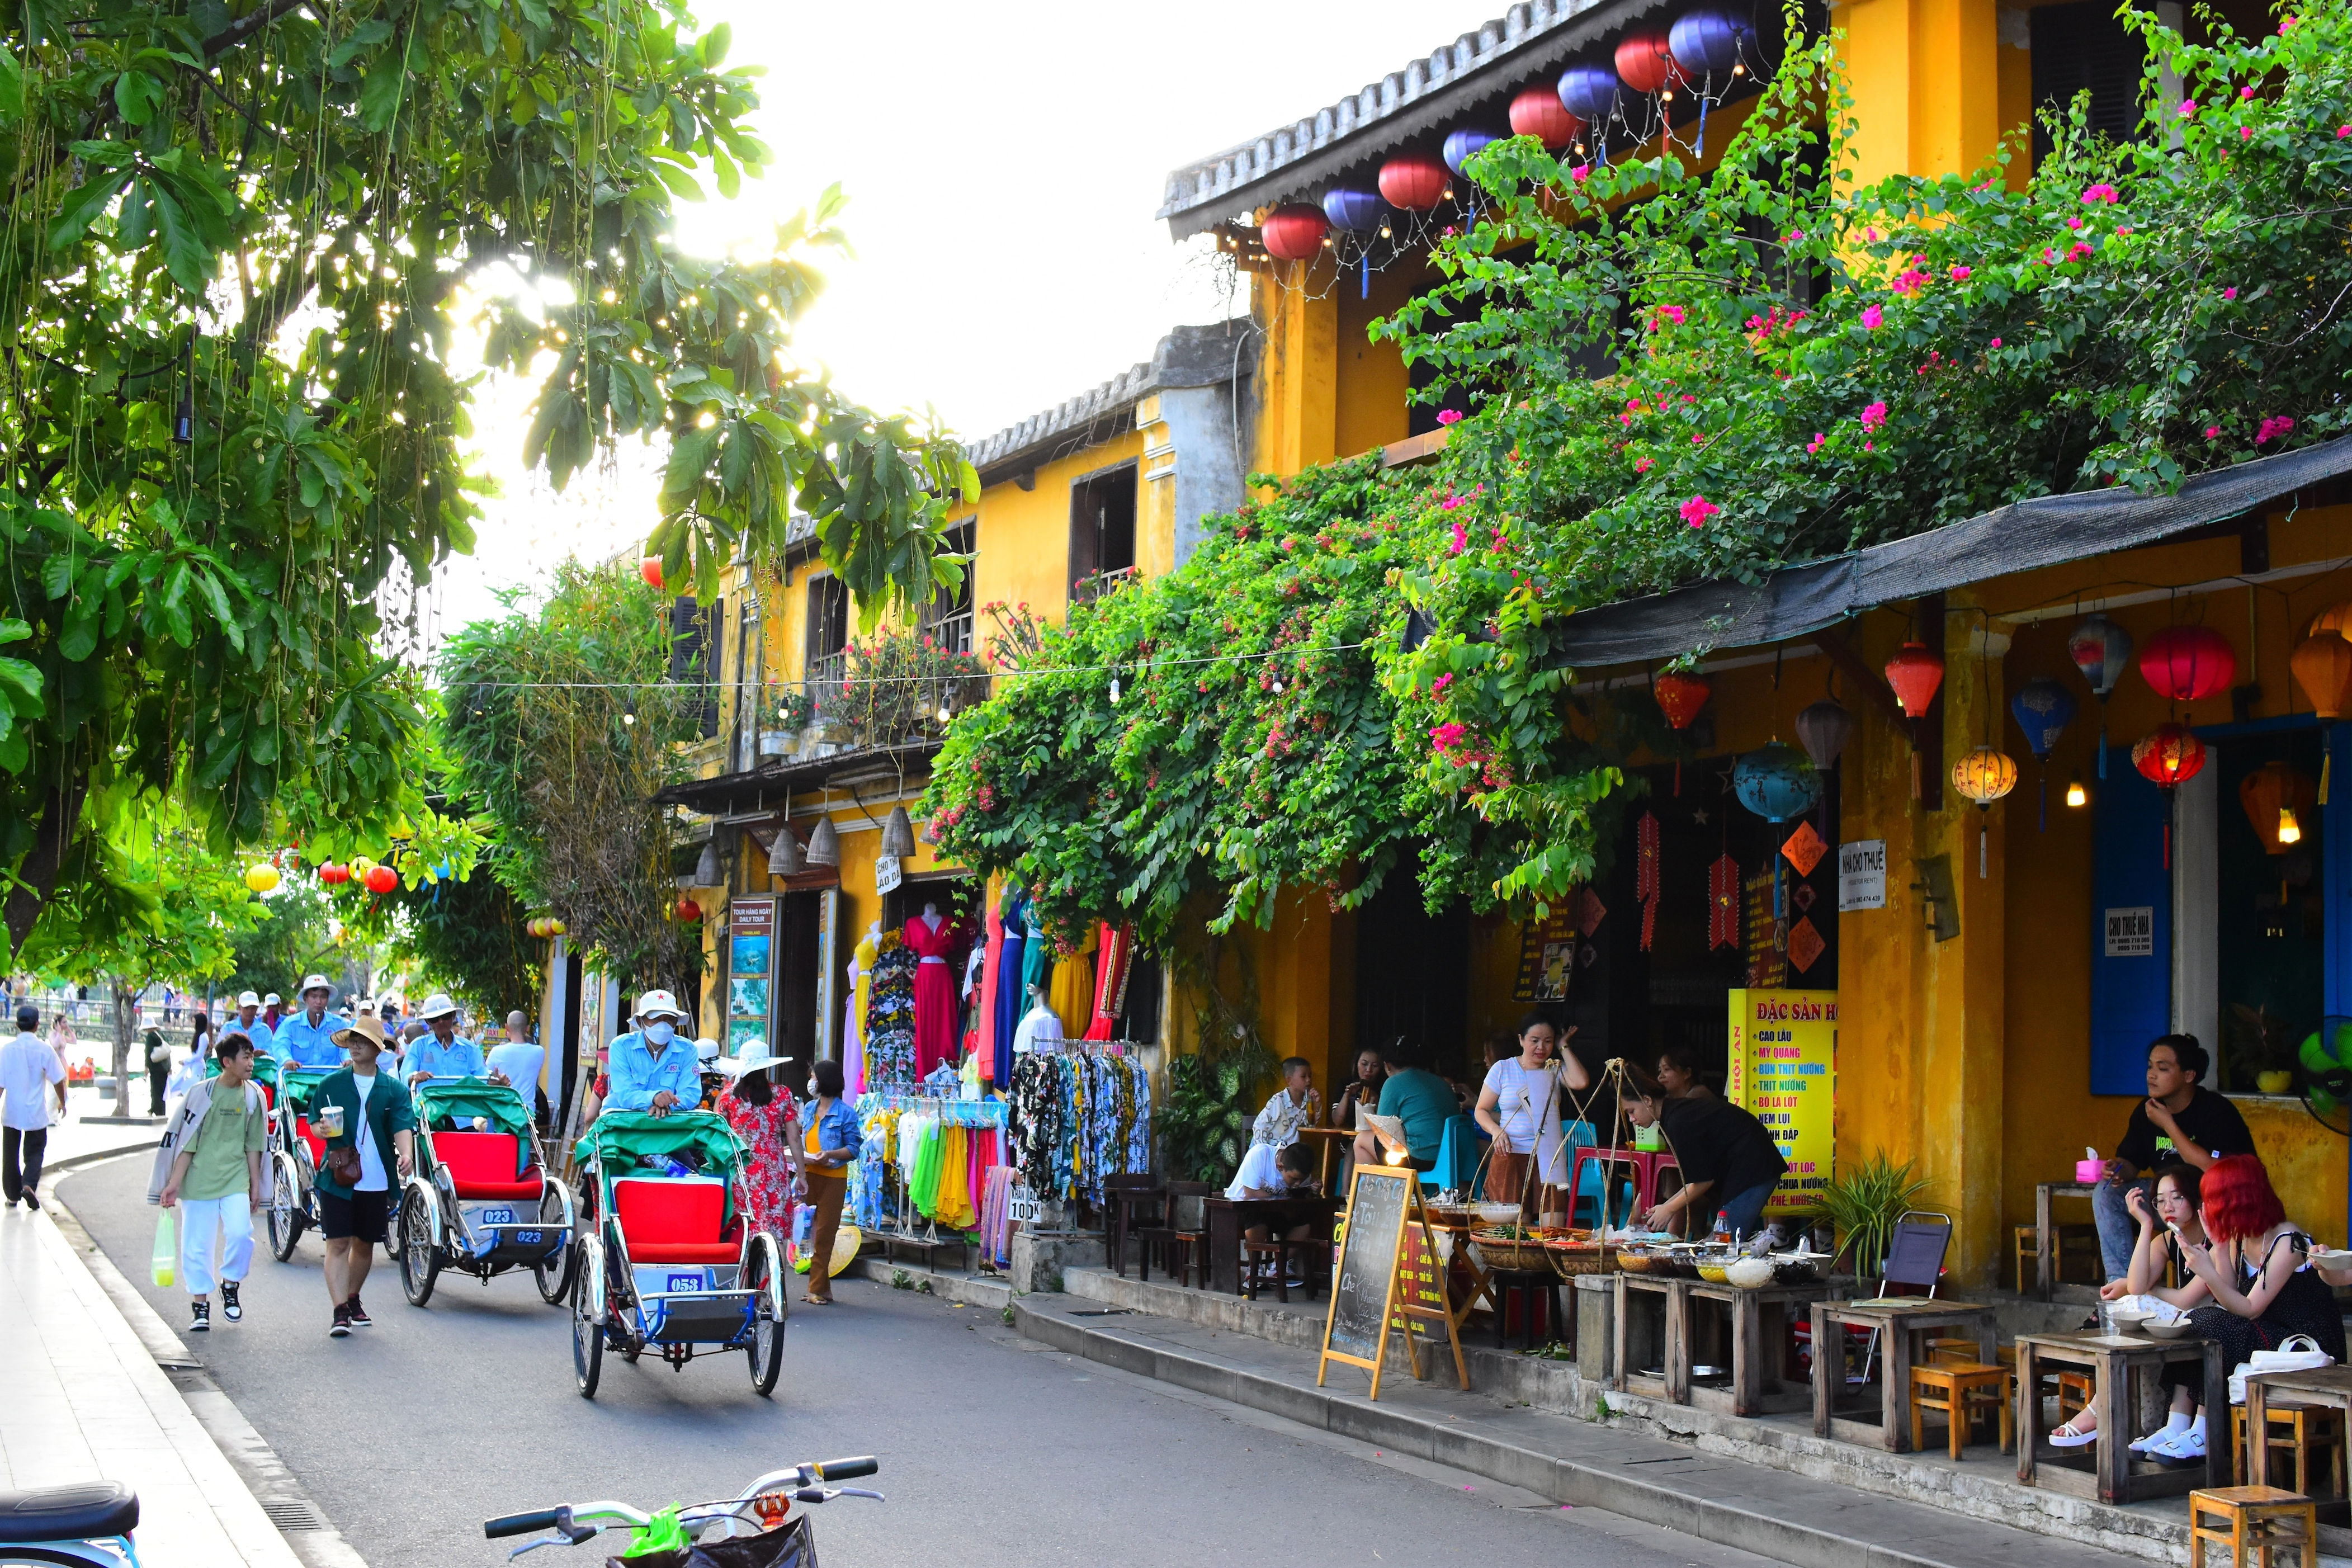 first time-traveller to vietnam? 5 things you must do here